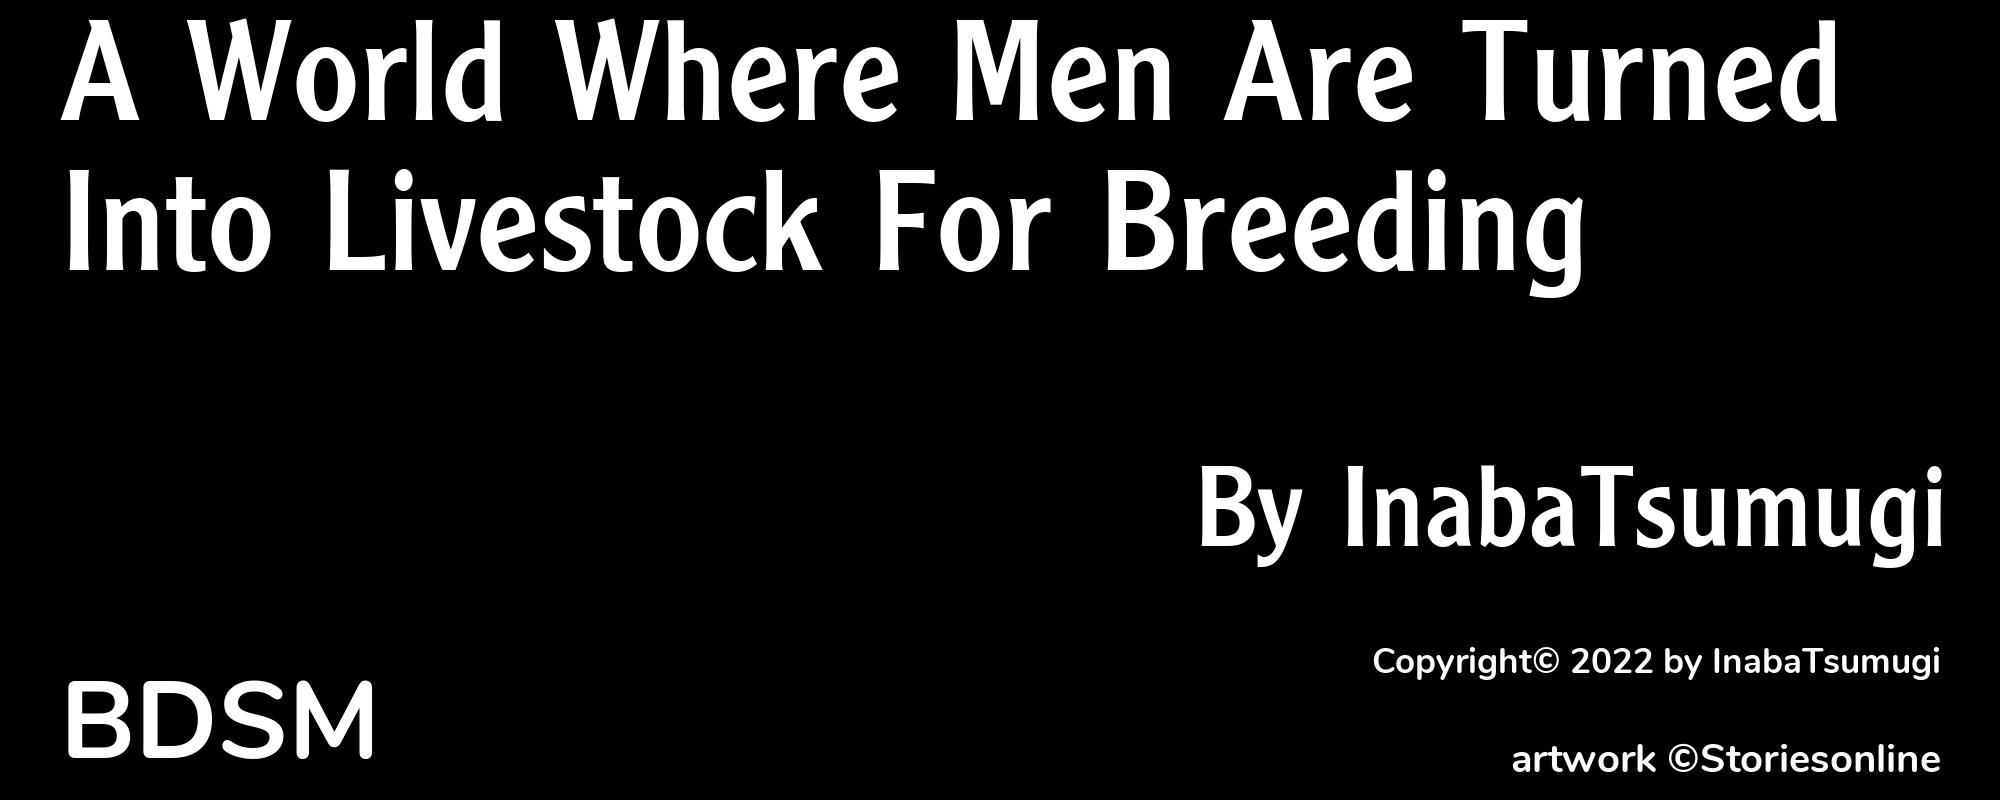 A World Where Men Are Turned Into Livestock For Breeding - Cover